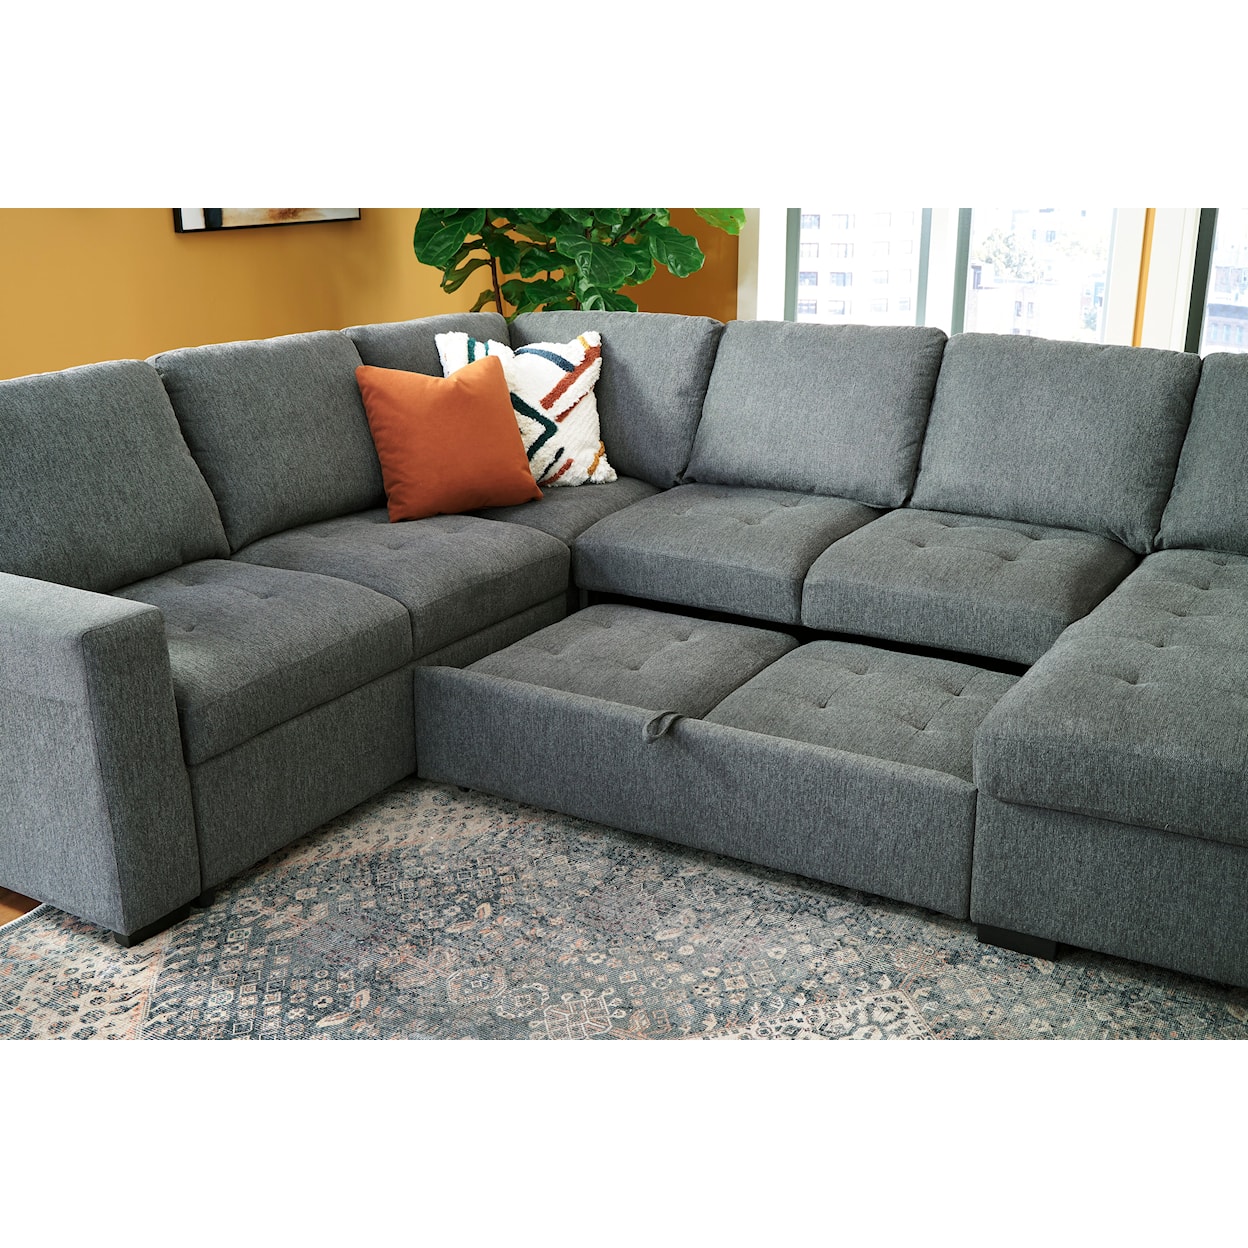 StyleLine Millcoe 3-Piece Sectional with Pop Up Bed